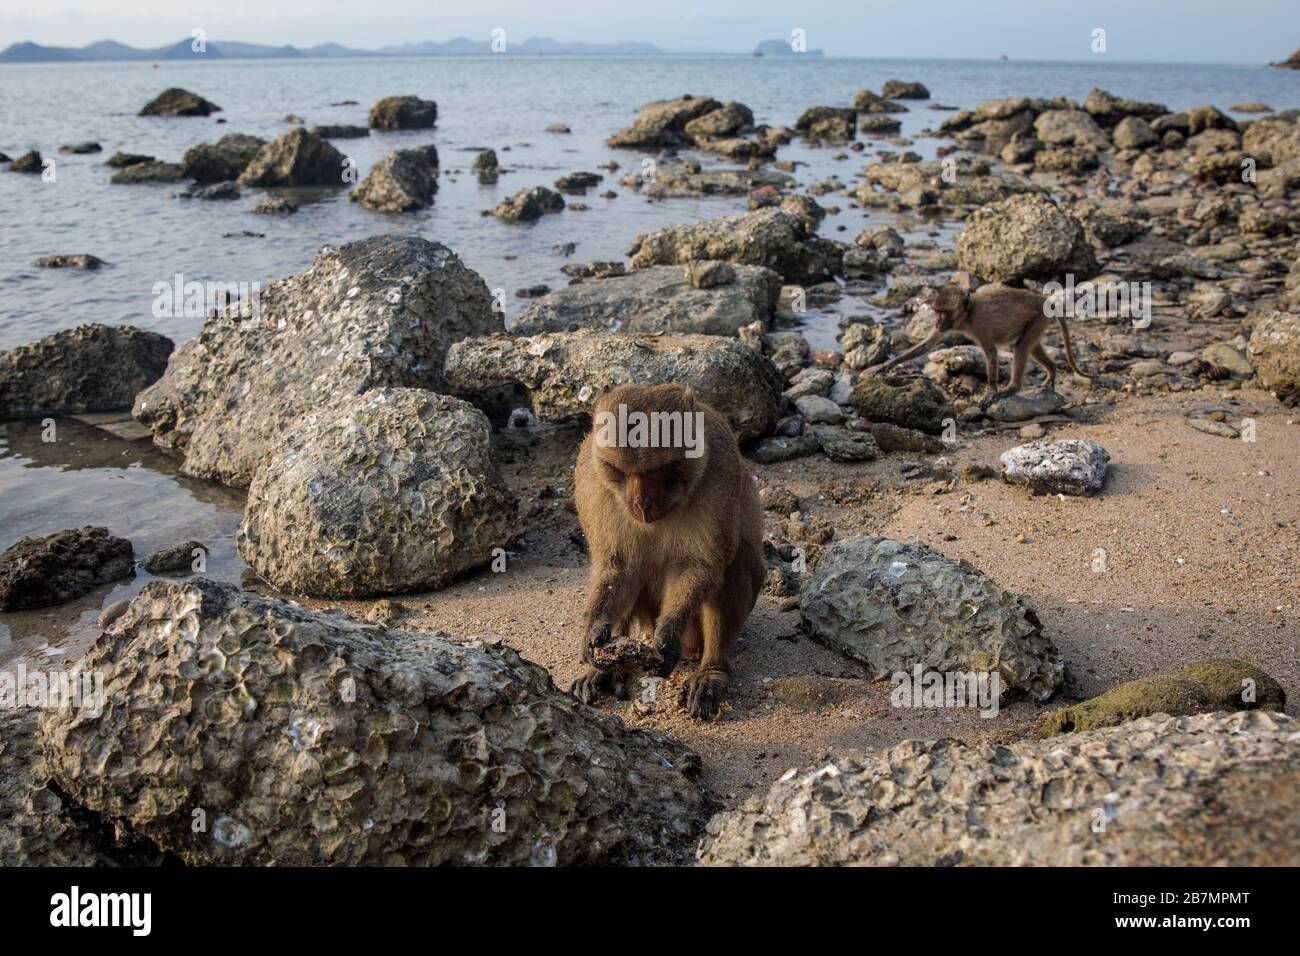 SAM ROI YOT, THAILAND: Macaque monkeys scavenge for food on a beach in Ko Koh Ram, also known as 'Monkey Island, in Khao Sam Roi Yot, Thailand on March 14, 2020. (Photo - Jack Taylor) Stock Photo